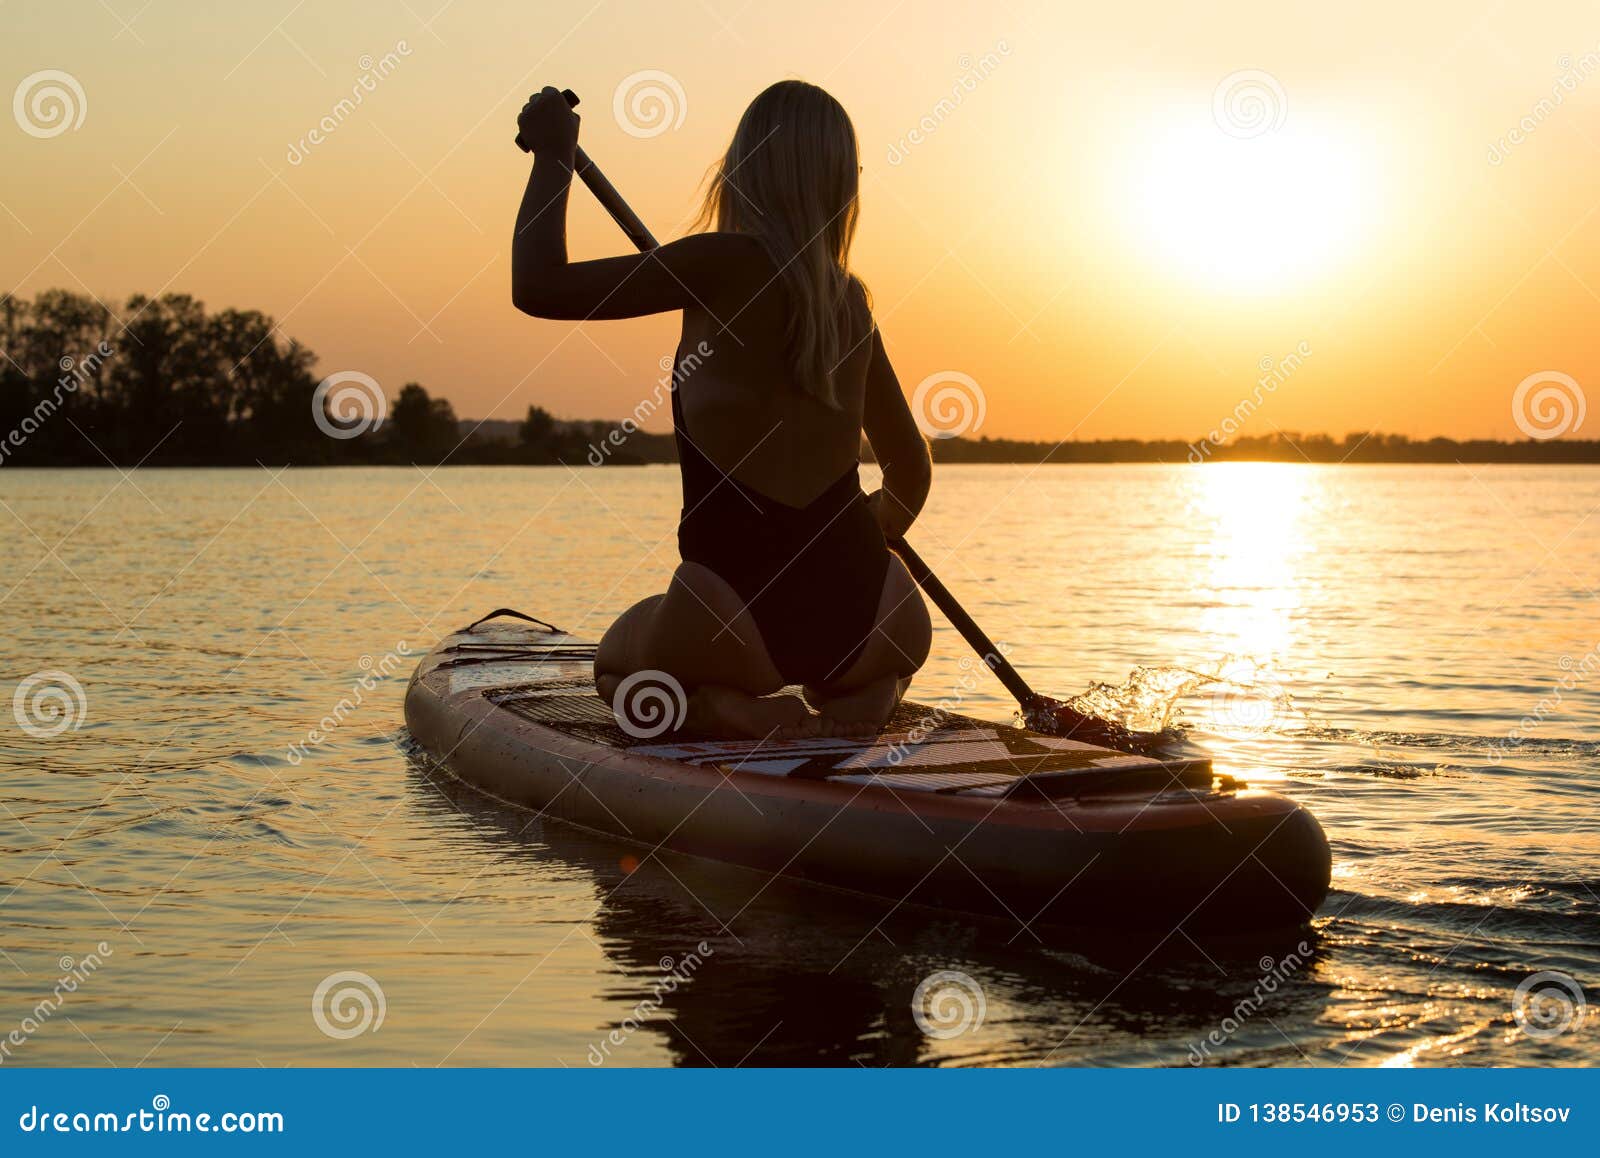 Young Woman Swimming on Stand Up Paddle Board.Water Sports , Active ...